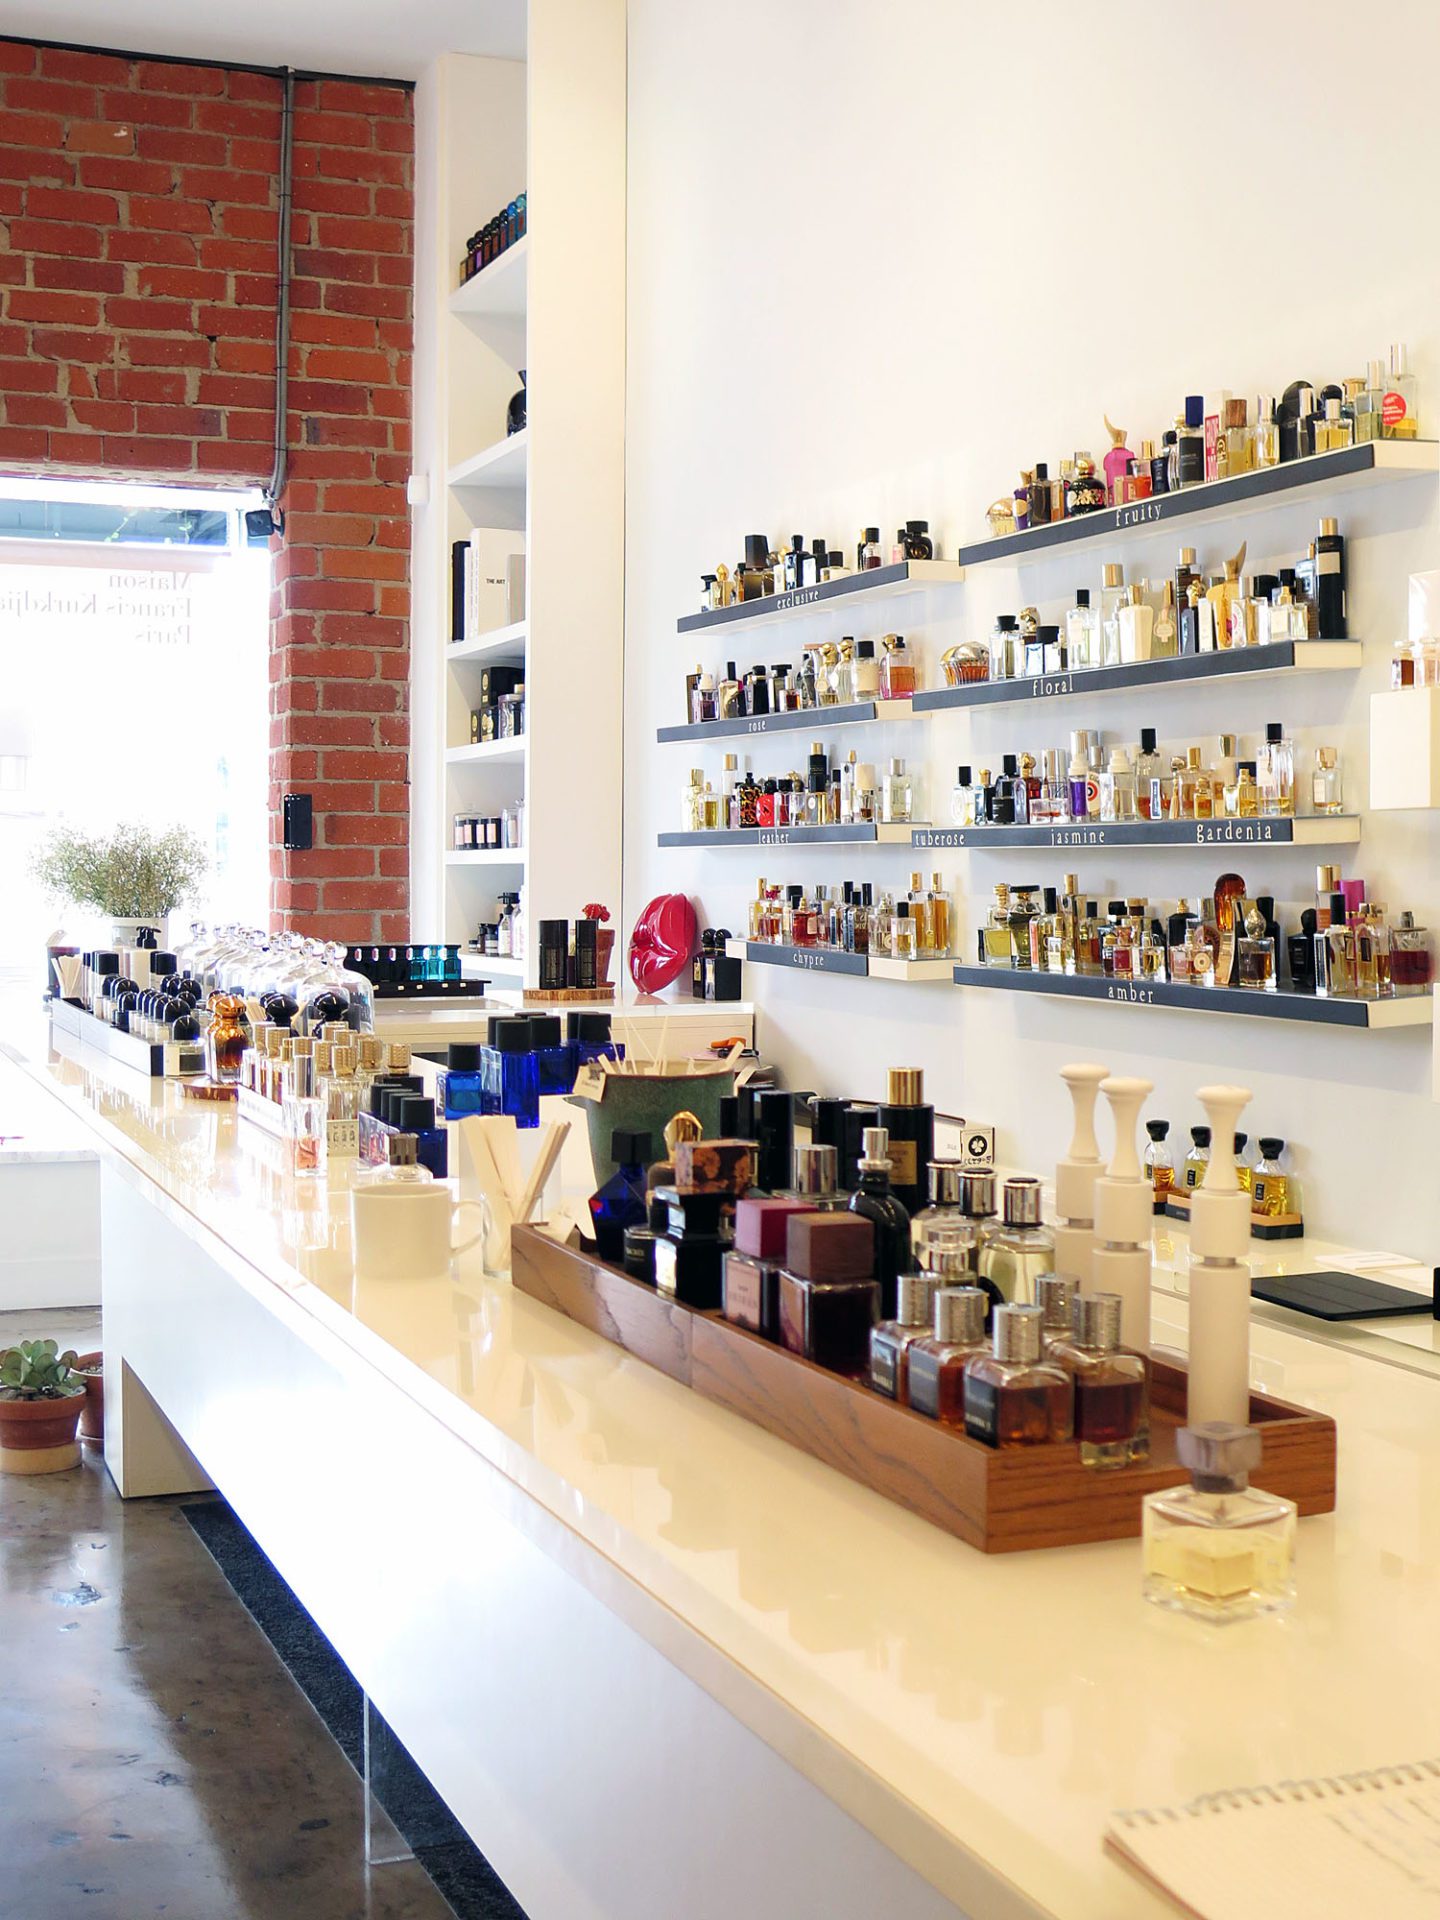 Lucky Scent - Scent Bar Los Angeles | The Beauty Look Book